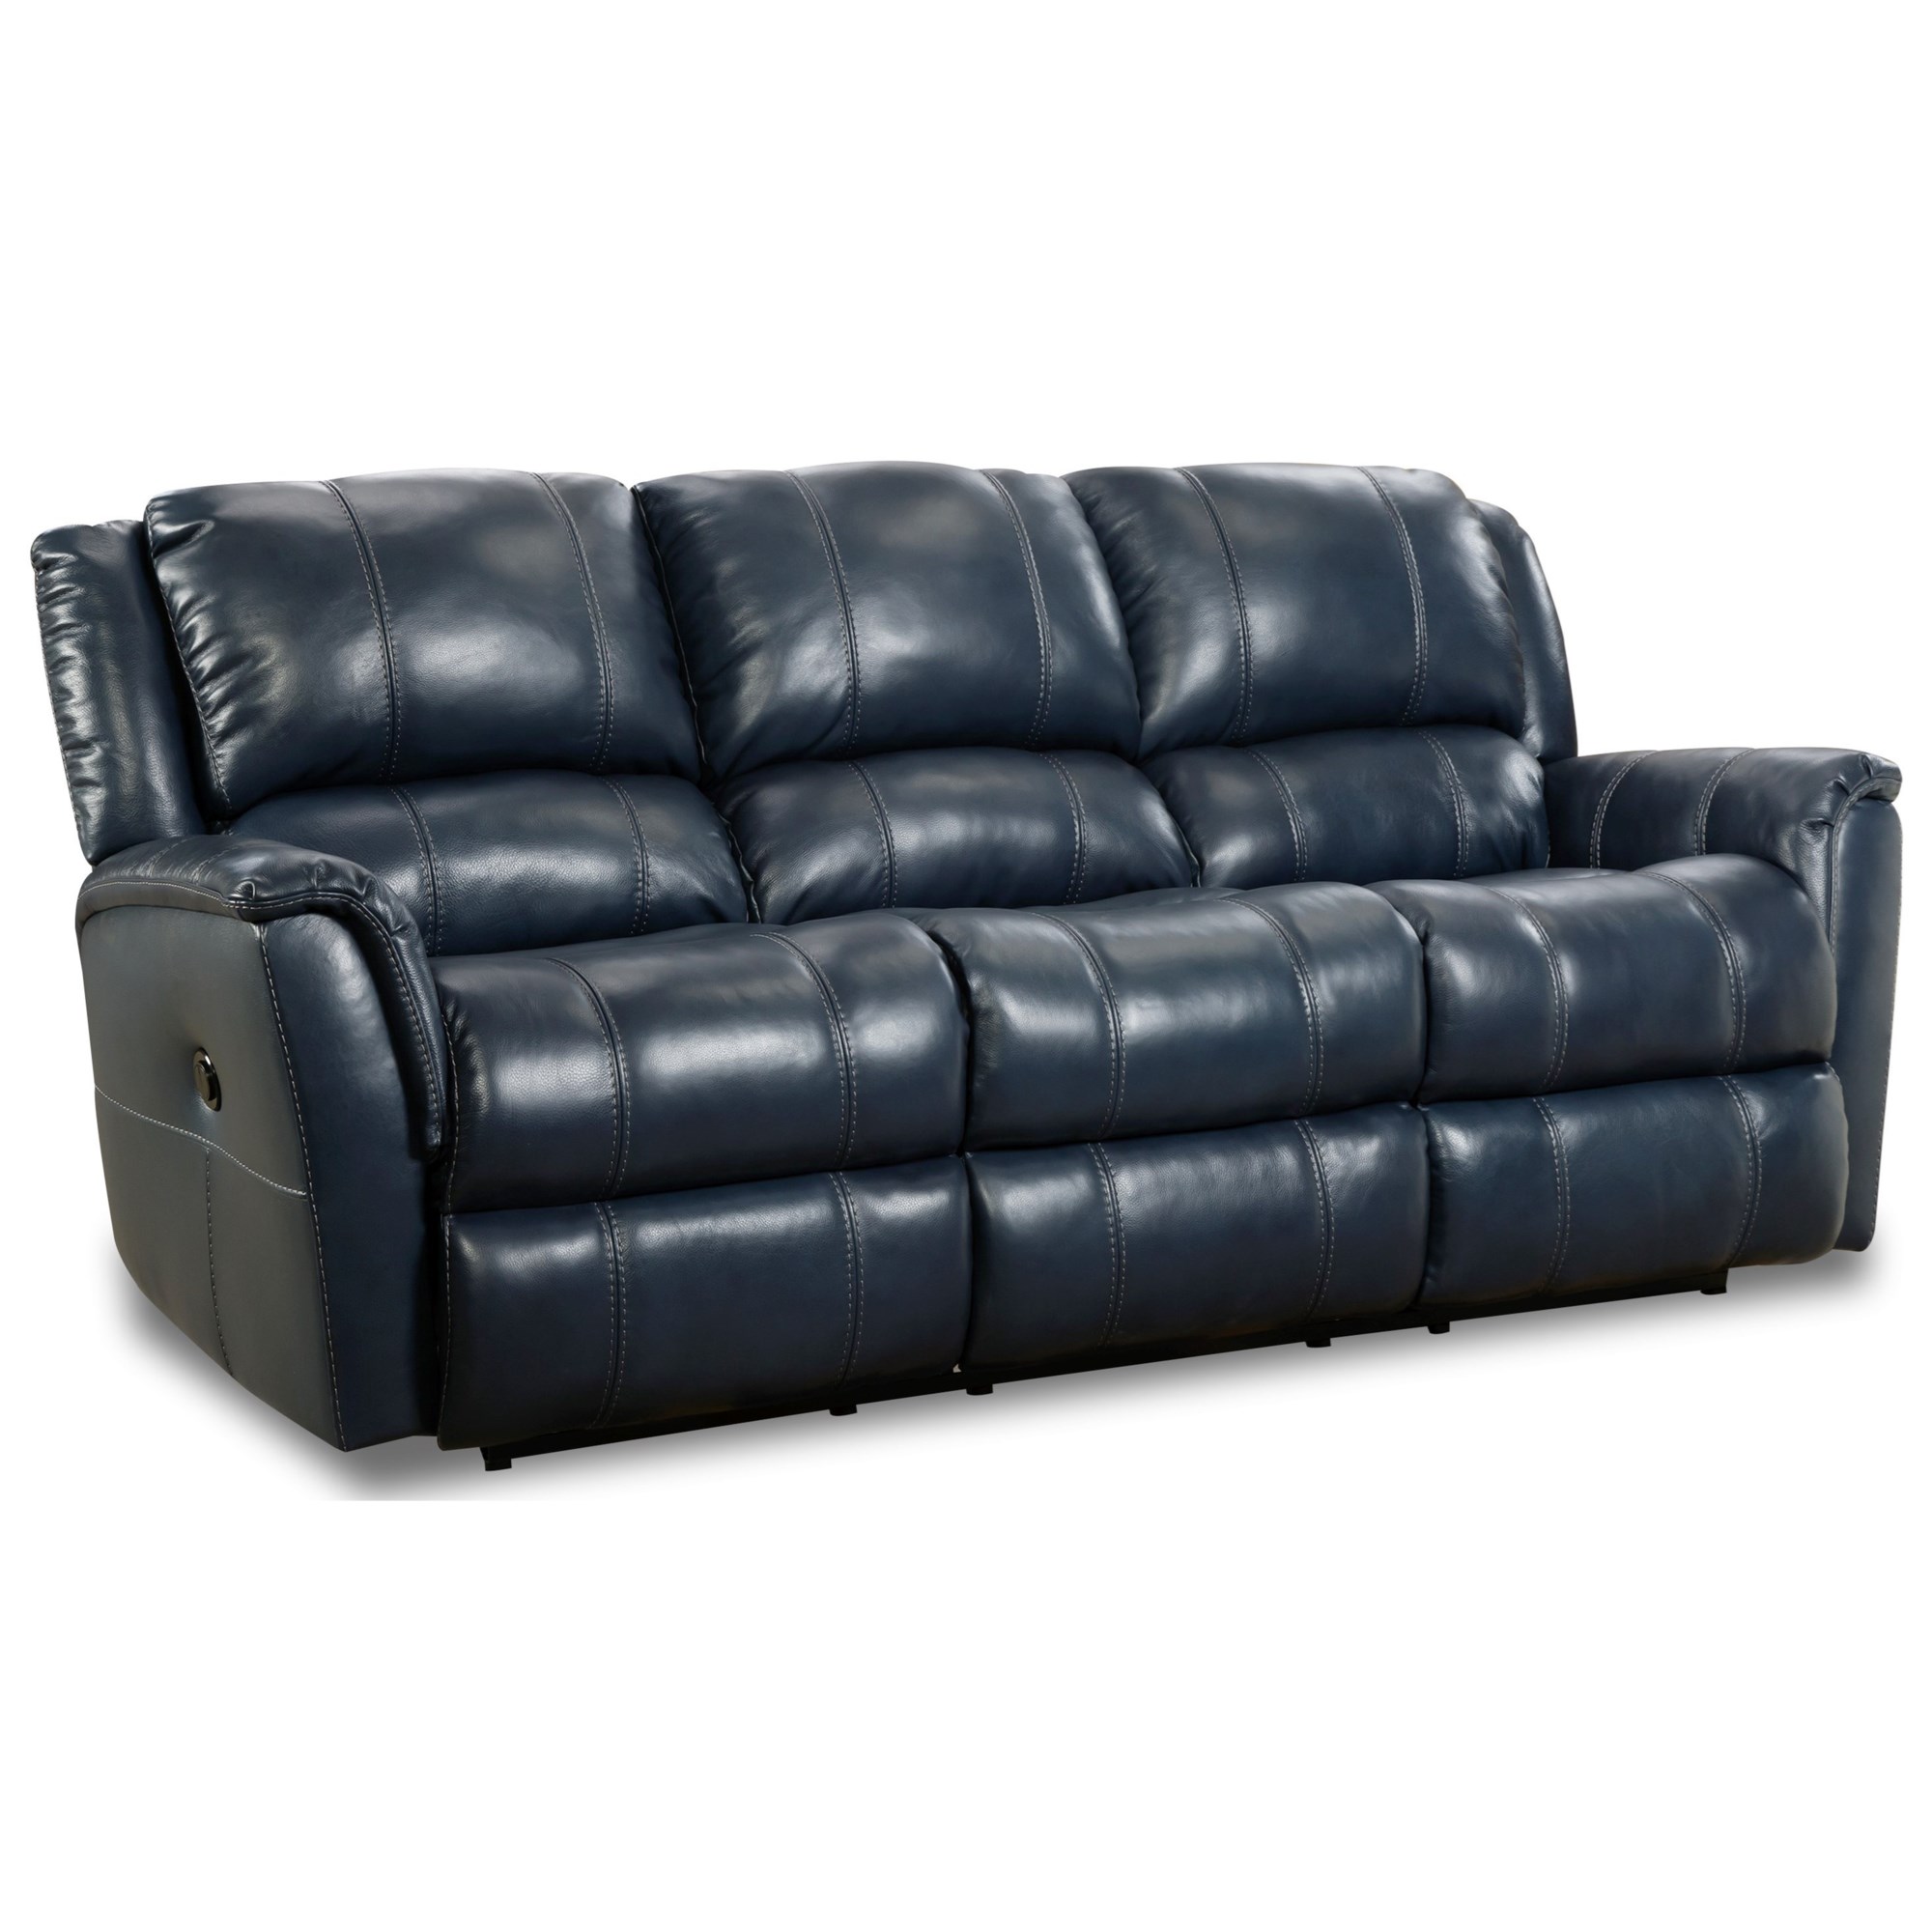 Homestretch 188 26031010101600 Casual Double Reclining Sofa With Pillow Top Arms Coconis